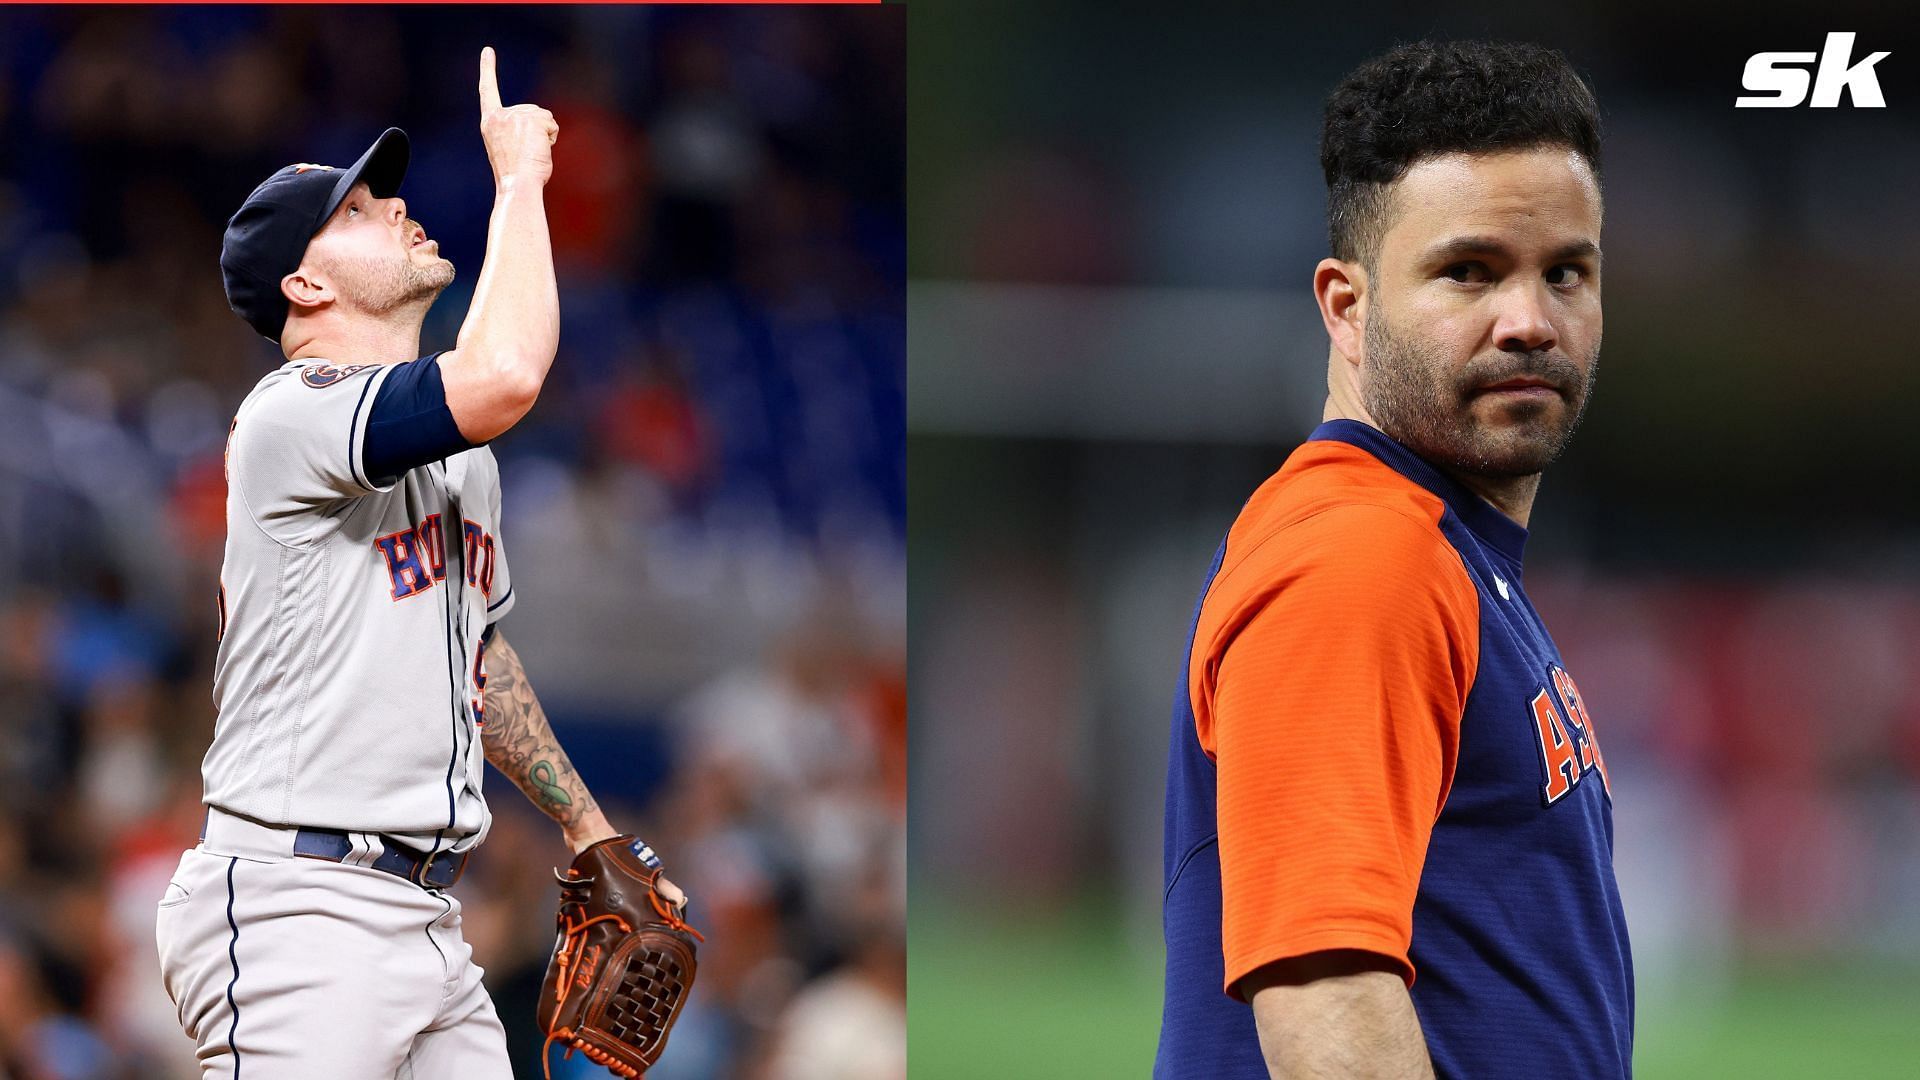 Jose Altuve's penchant for hitting exceeded by his desire to improve and  help Astros win